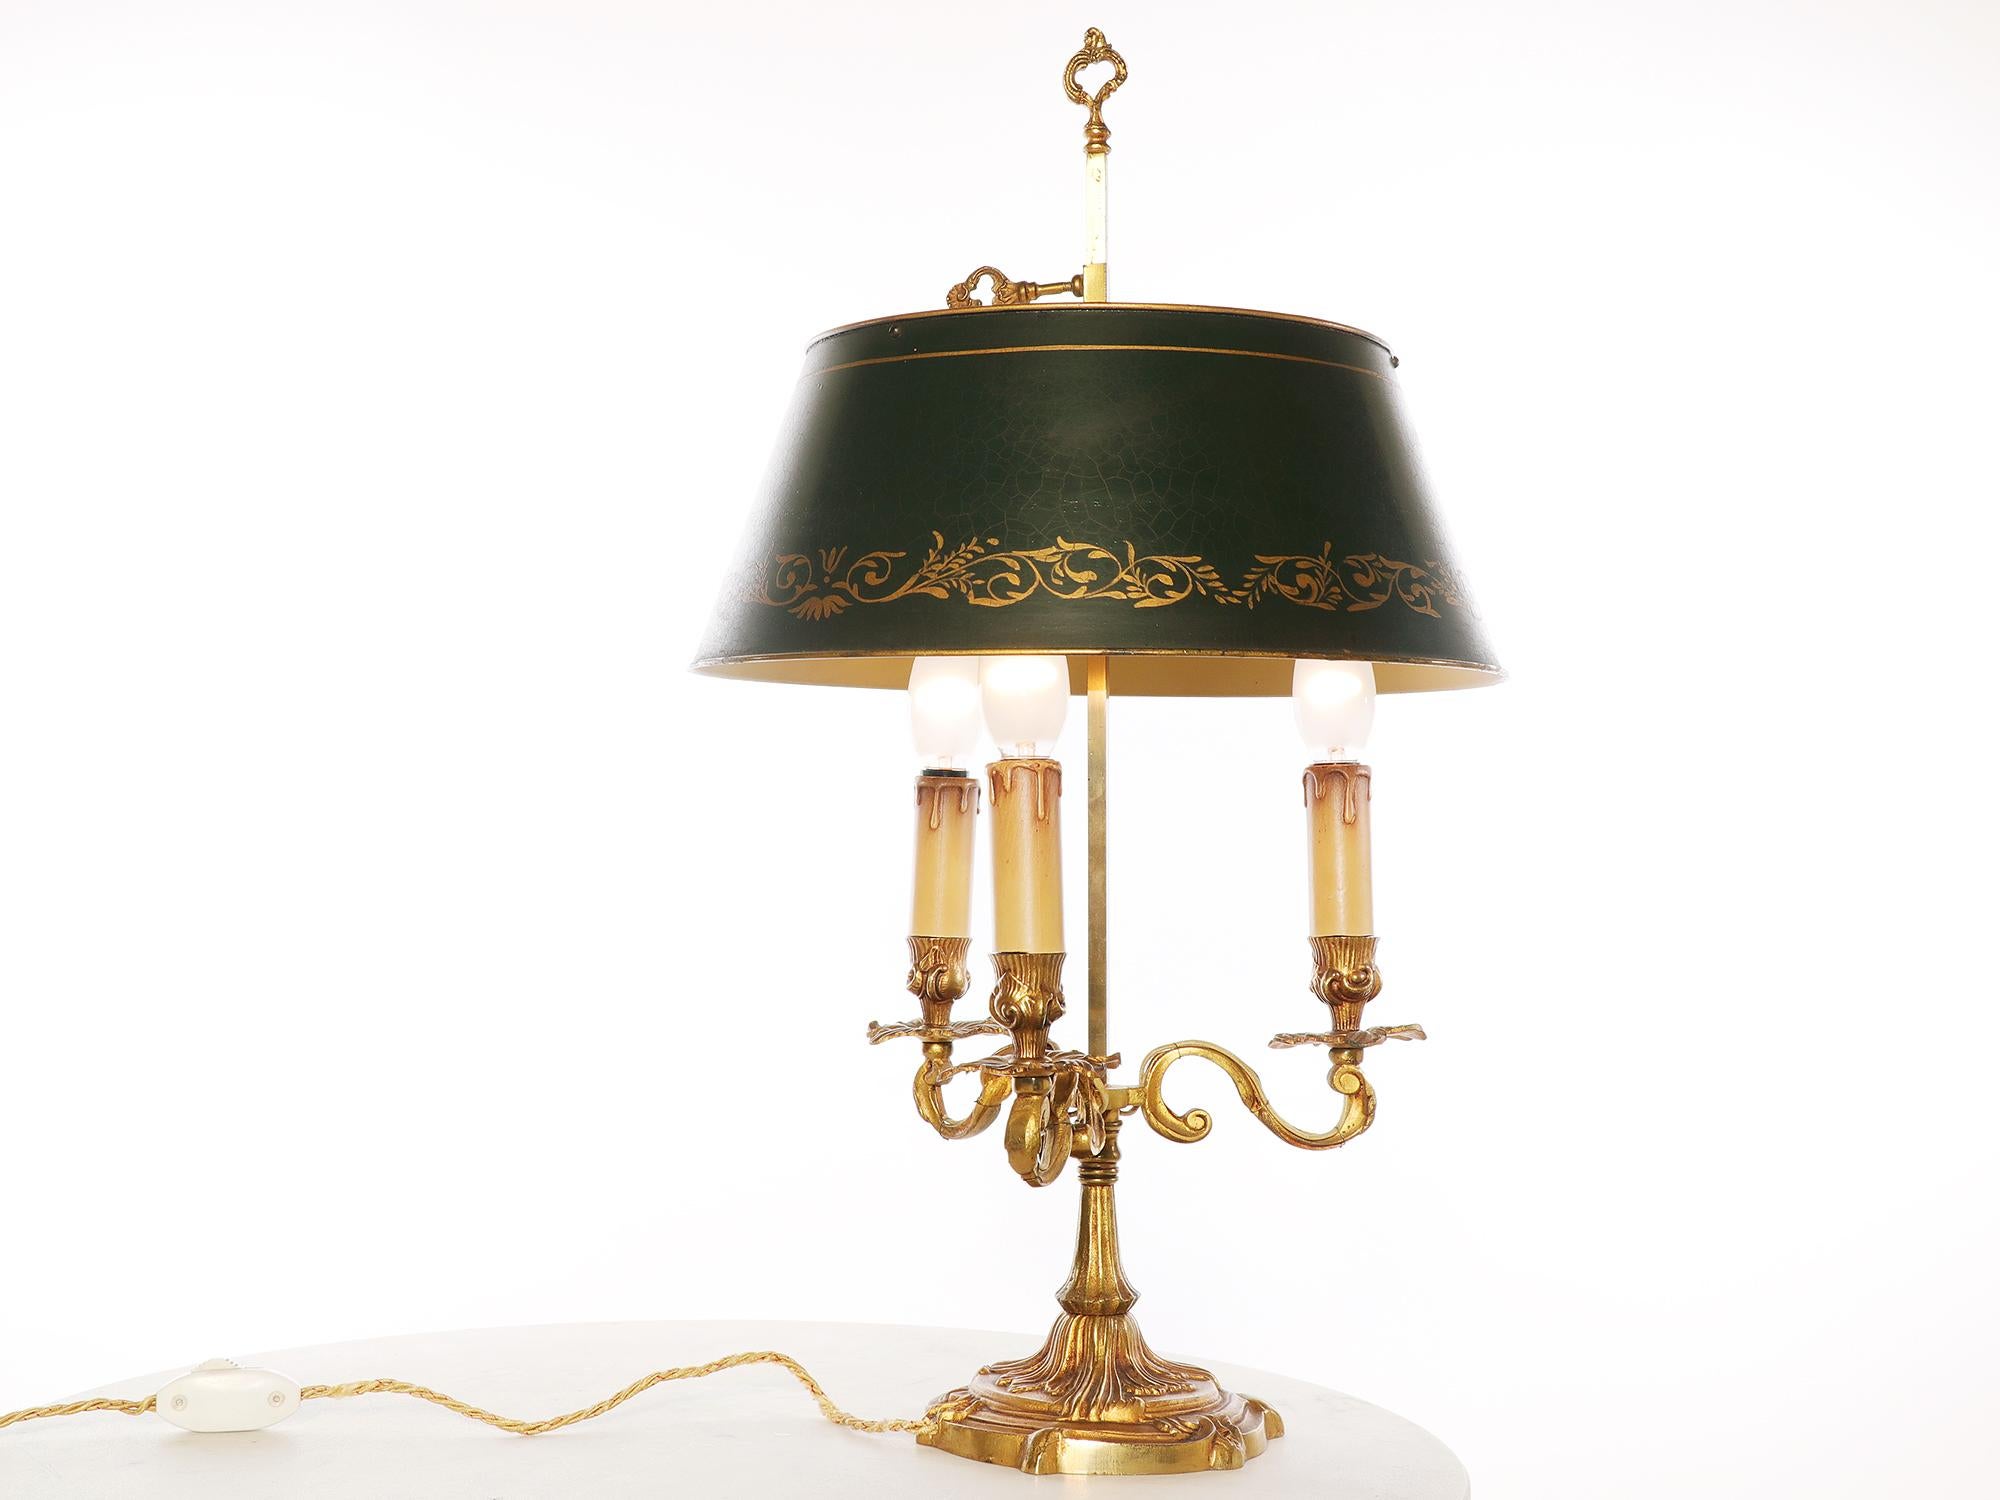 Elegant antique French gilt bronze Louis XV style Bouillotte lamp with a painted metal shade and three electrified candle- arms.
The lamp takes three small Edison bulbs, it originally used candles and was converted to an electric lamp in the early